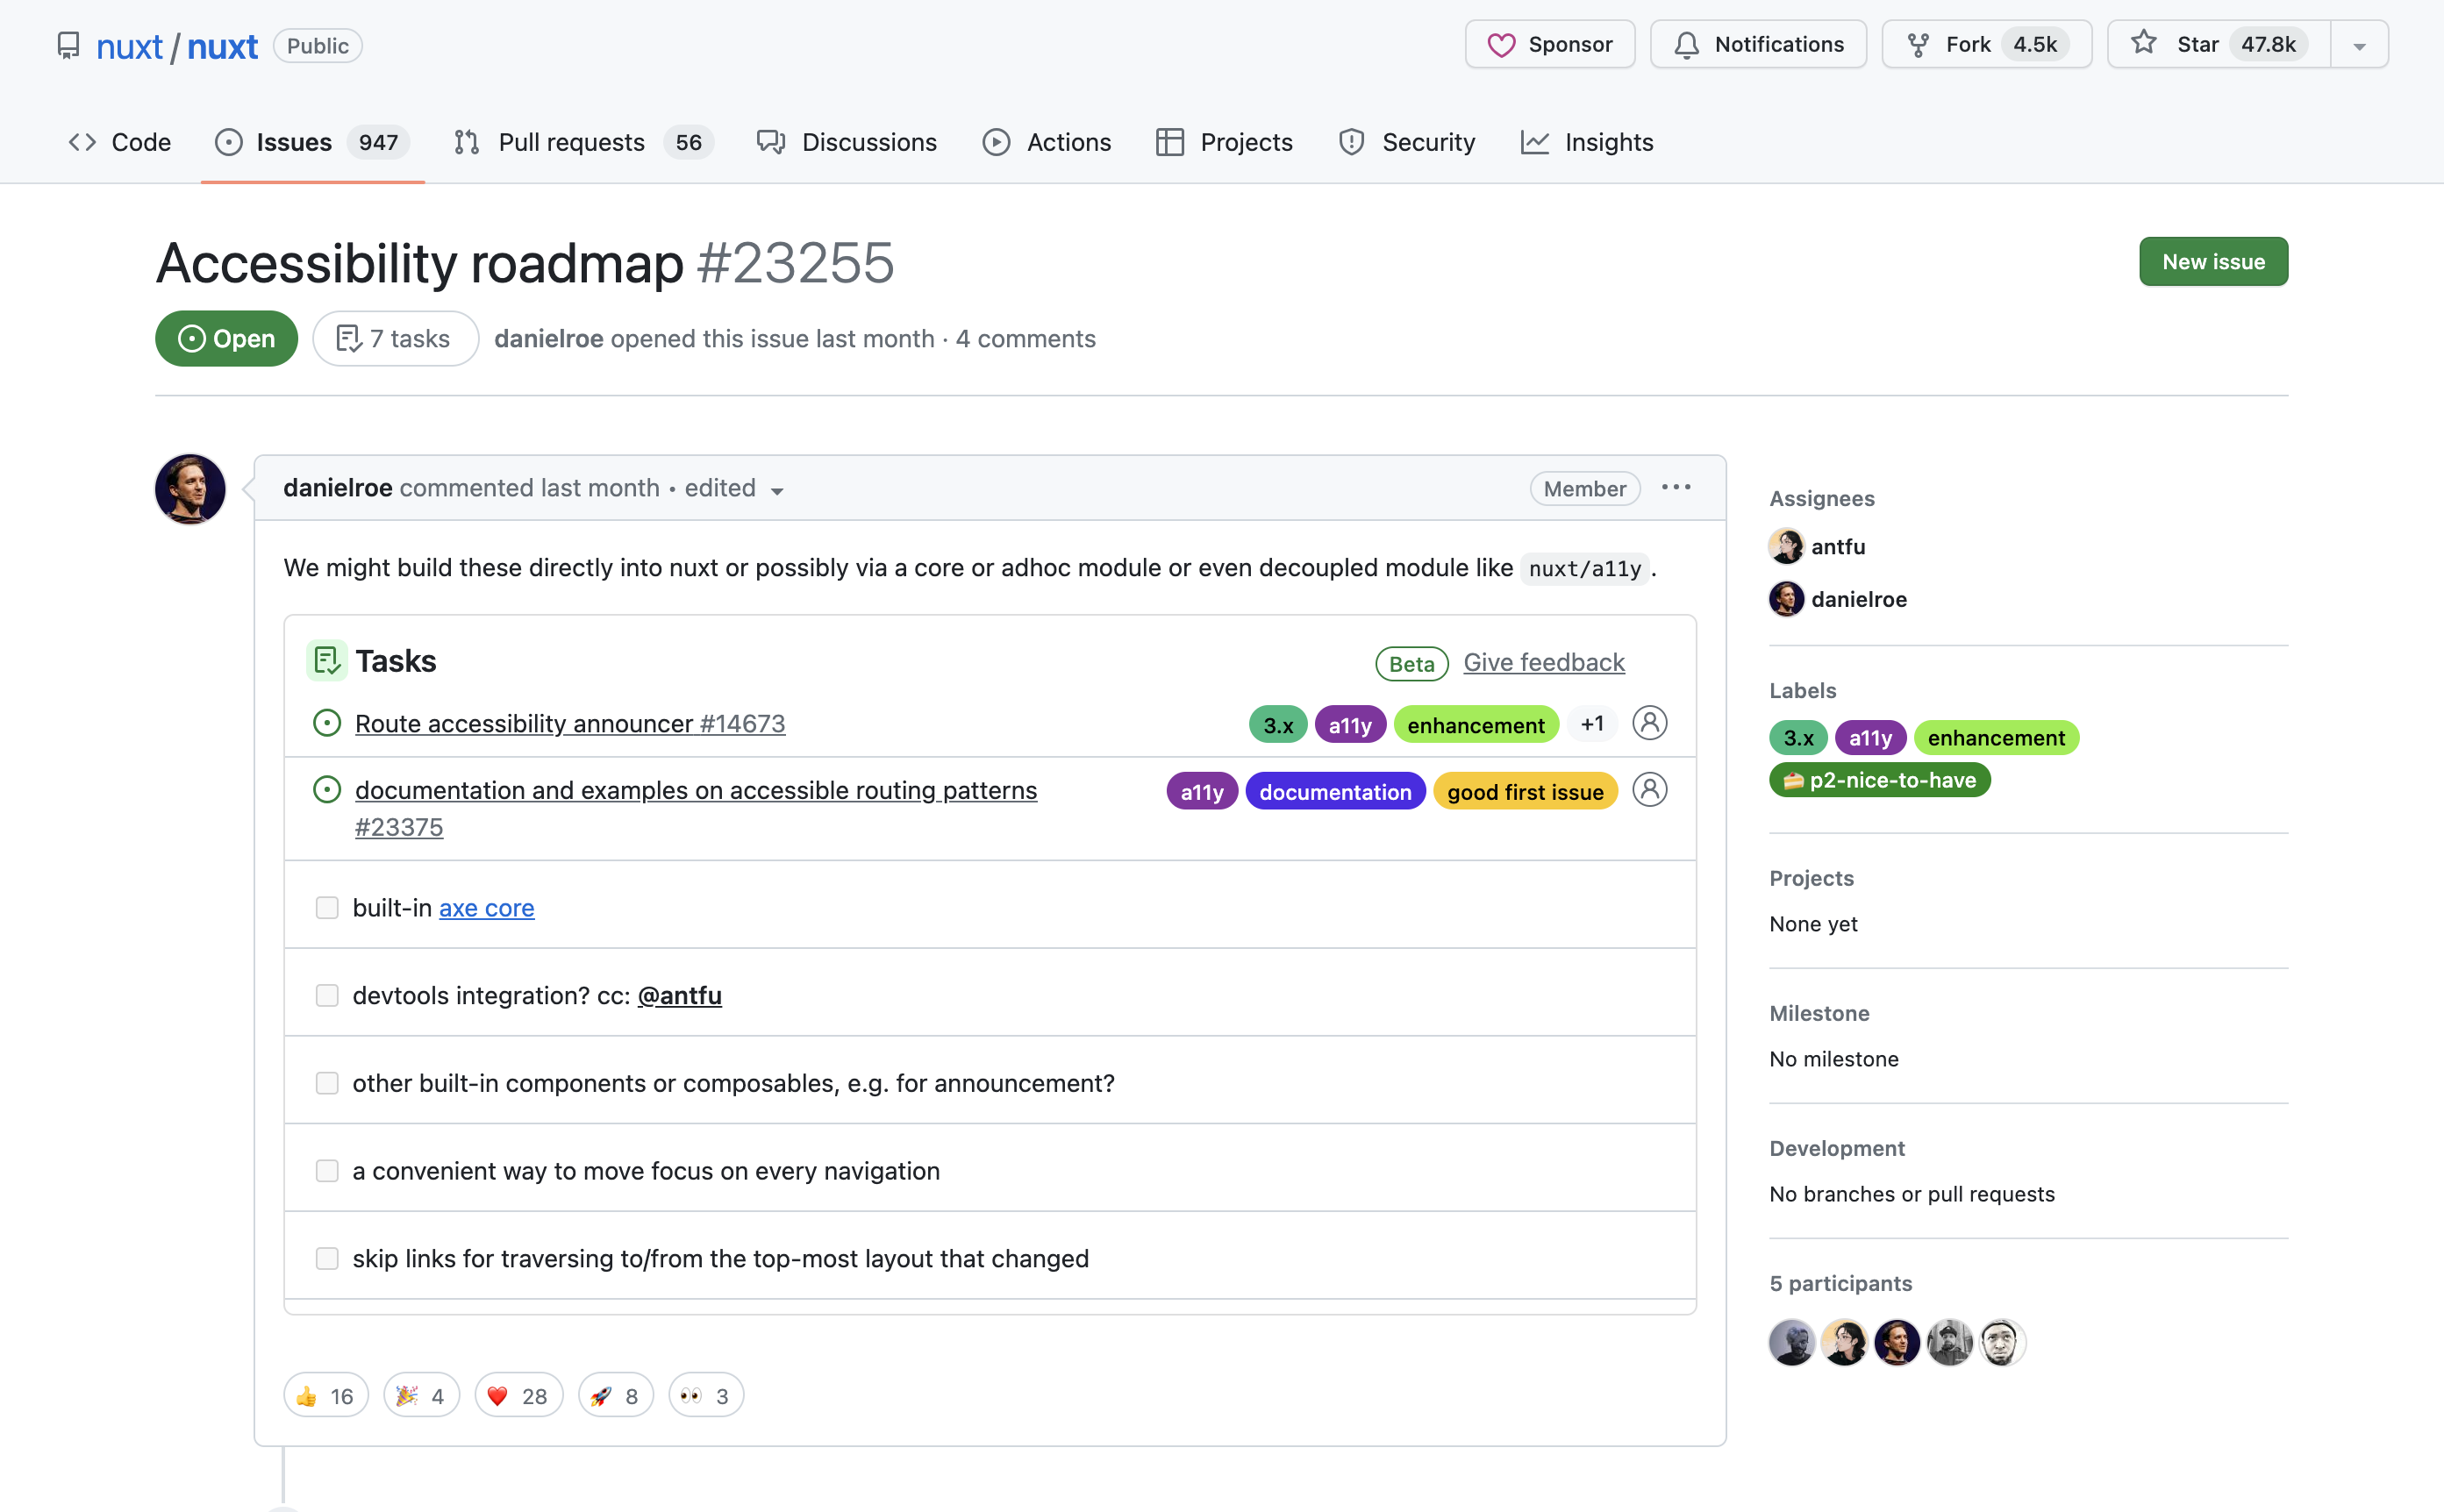 Screenshot: The GitHub Issue page detailing Nuxt.js’s accessibility roadmap